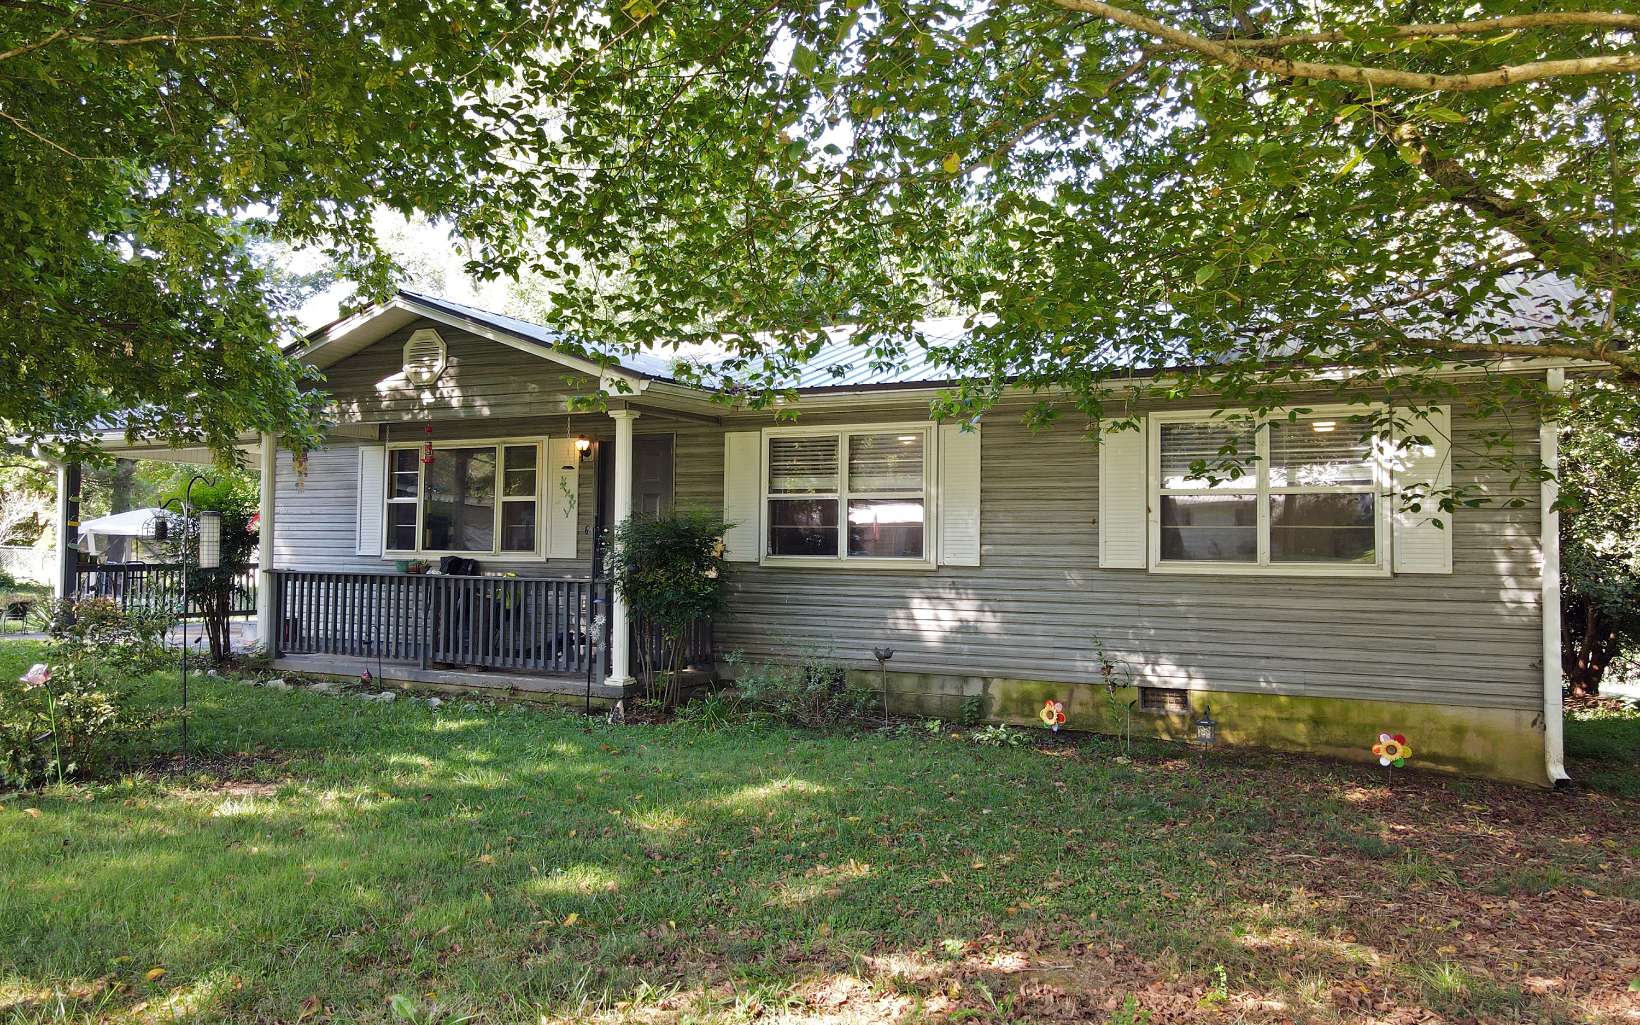 Ranch style home with carport all on one level with a BRAND new HVAC system. TENANT occupied but very easy to show. WHEN property goes under contract, a 45-day notice will be given to tenant to vacate the property. Very easy to work with and will not be an issue.